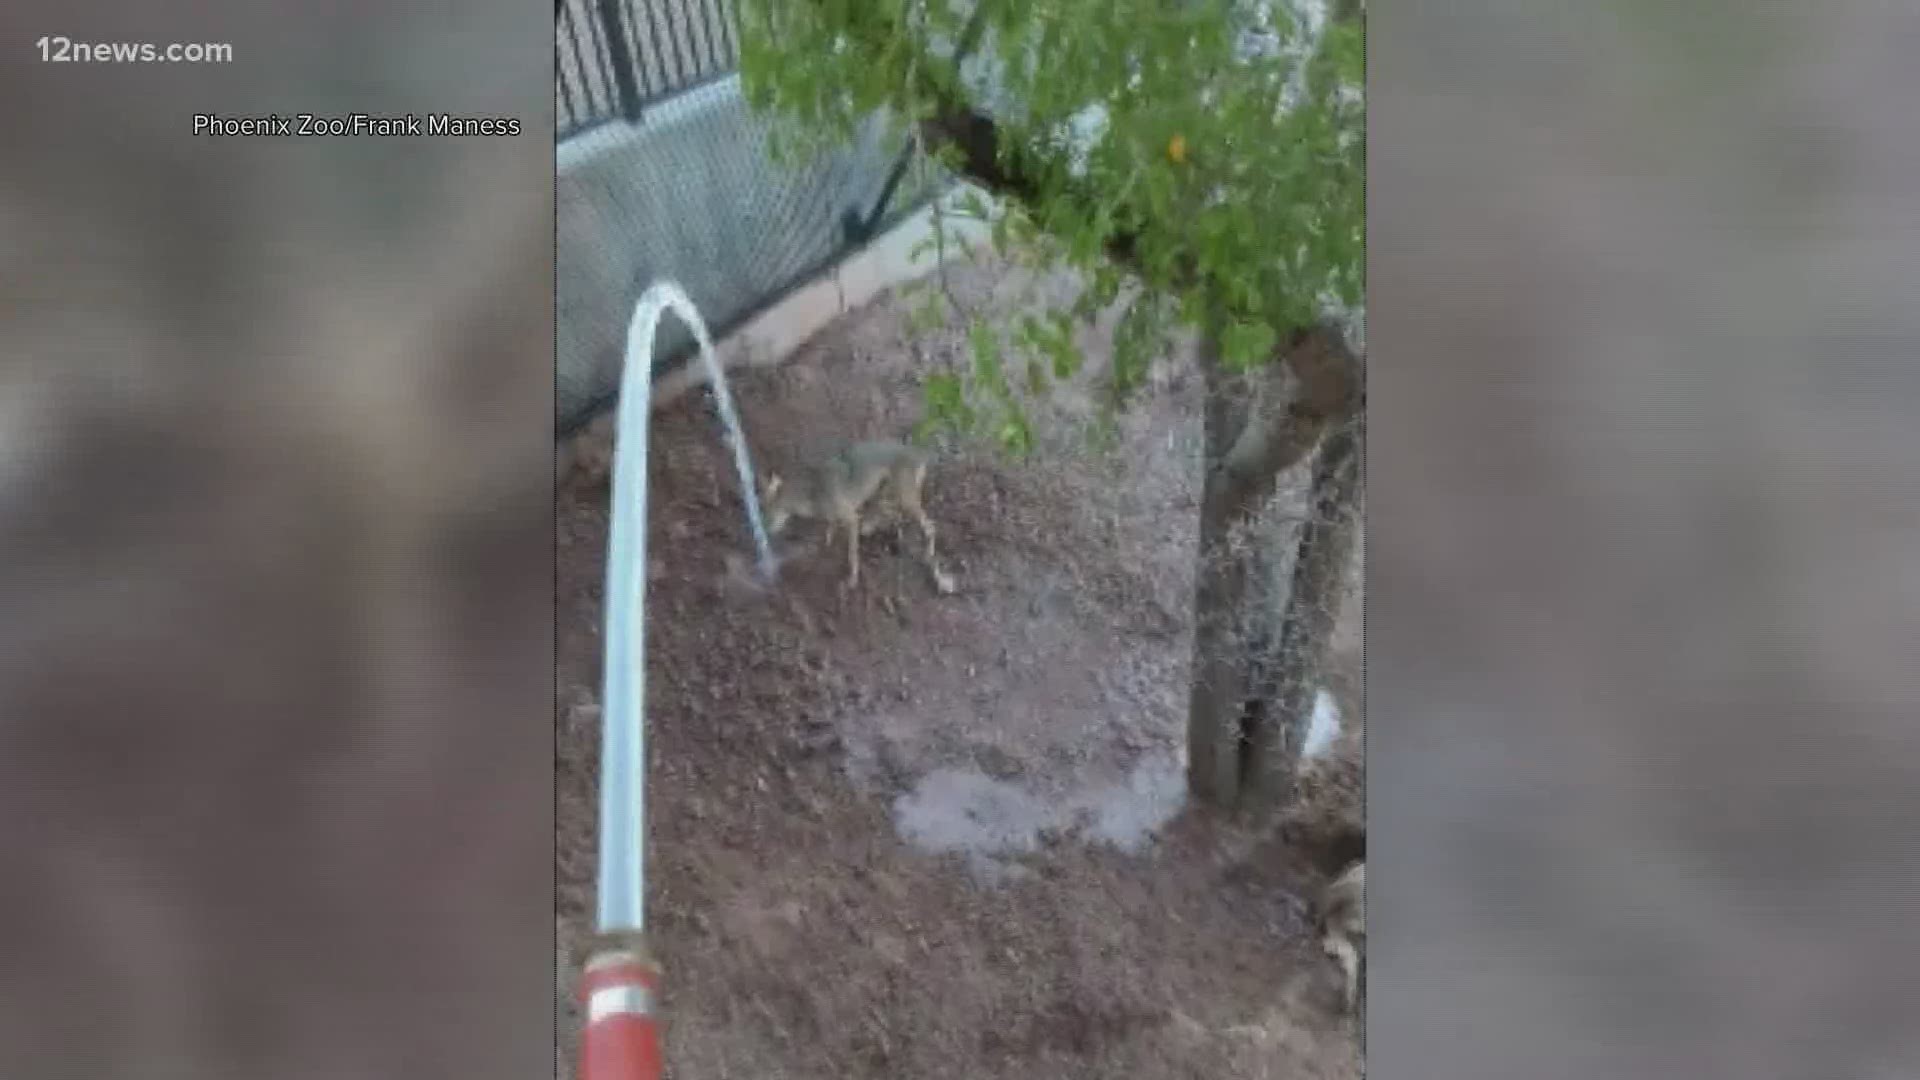 As you may have noticed, it has been really hot in Phoenix lately. The coyotes over at the Phoenix Zoo decided to play in some water from a hose to stay cool!